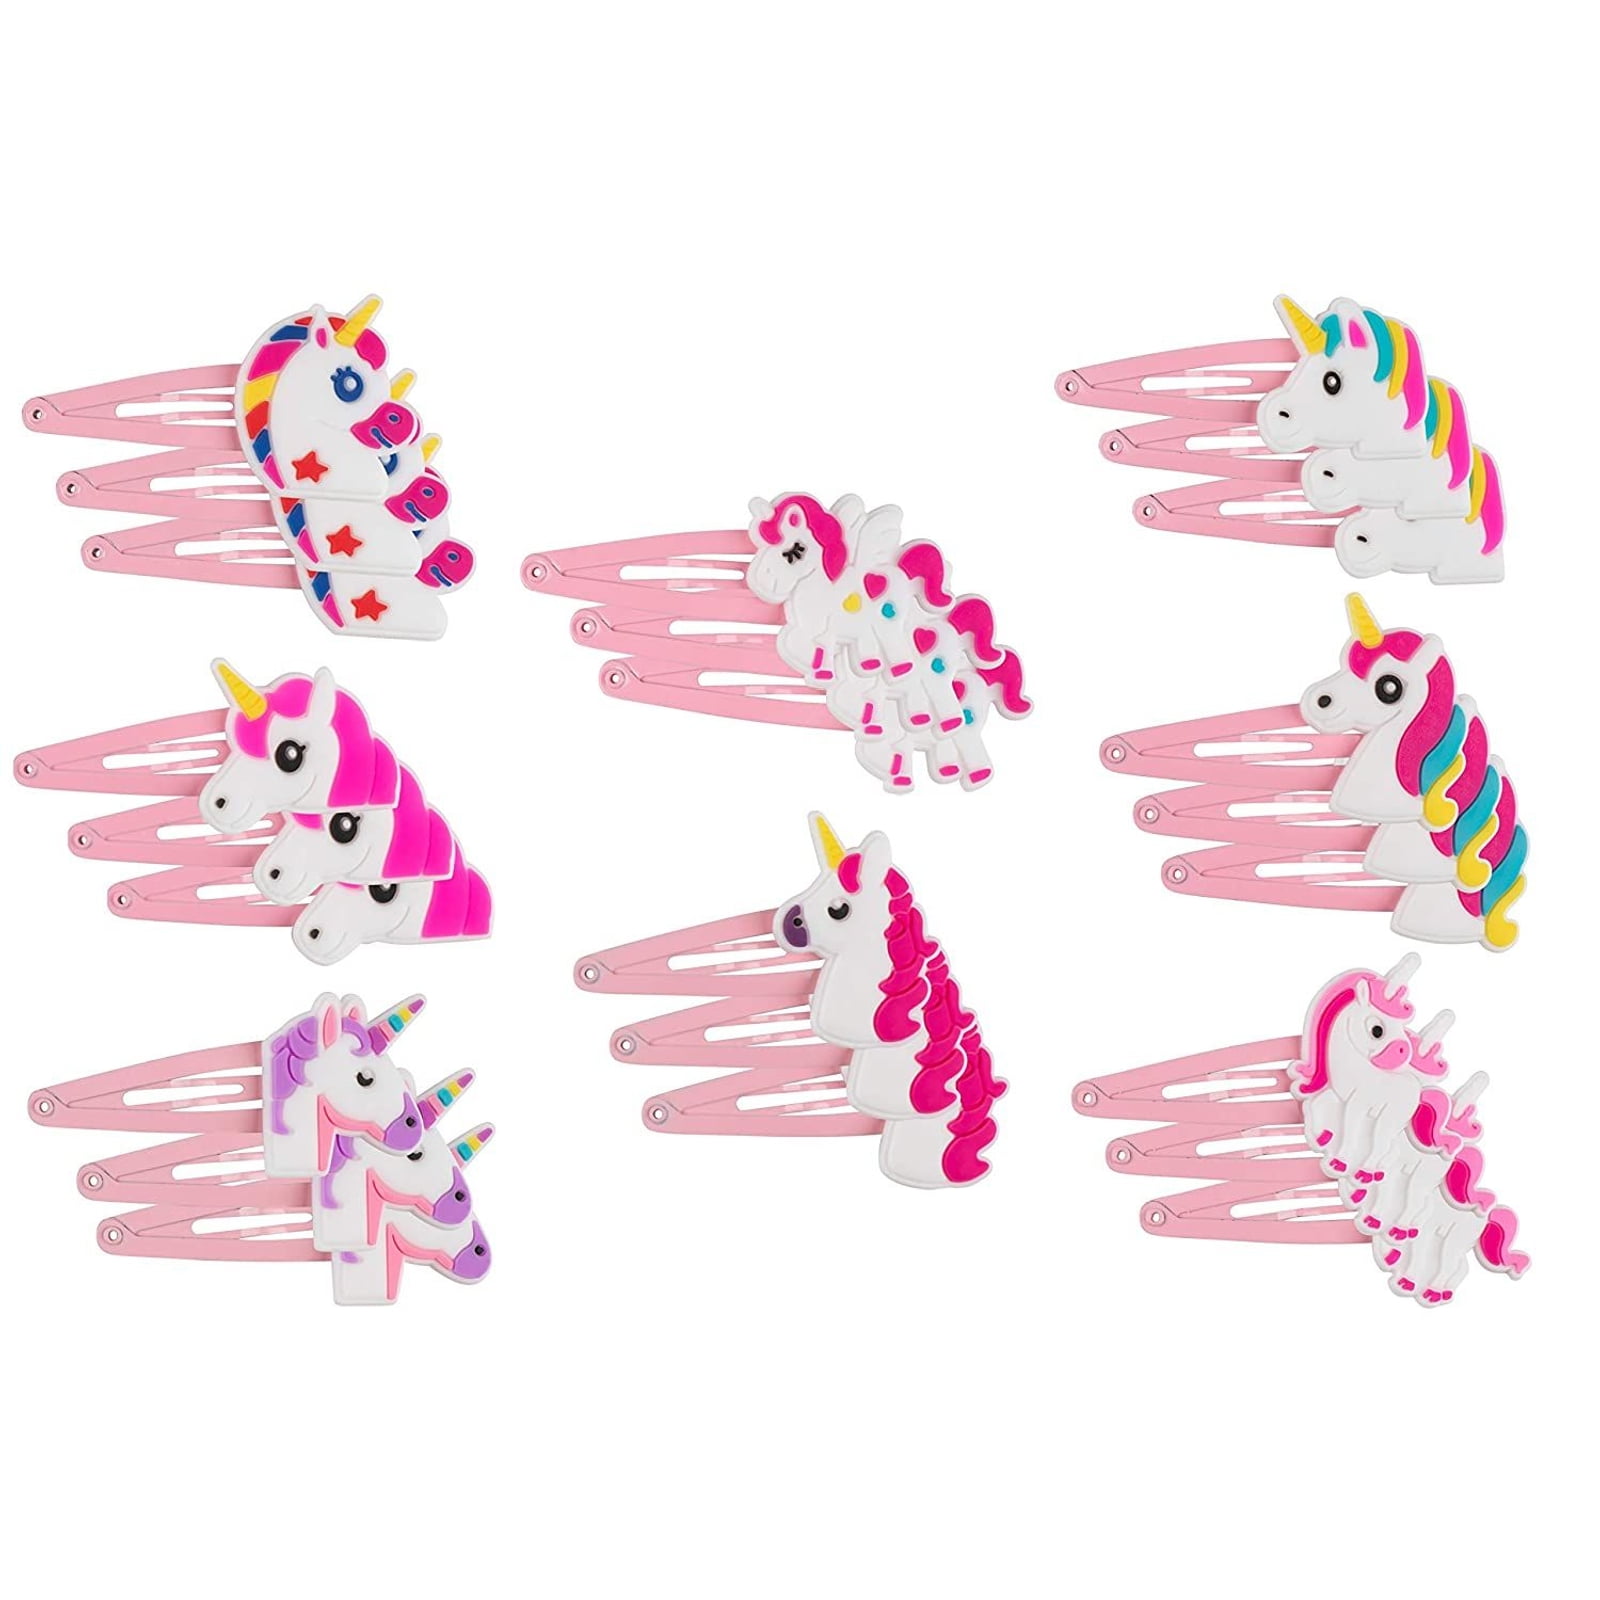 Girlish Colour Bangs Hairpin Suit Heart Rainbow Stripe Hair Snap Clips 4 Pack